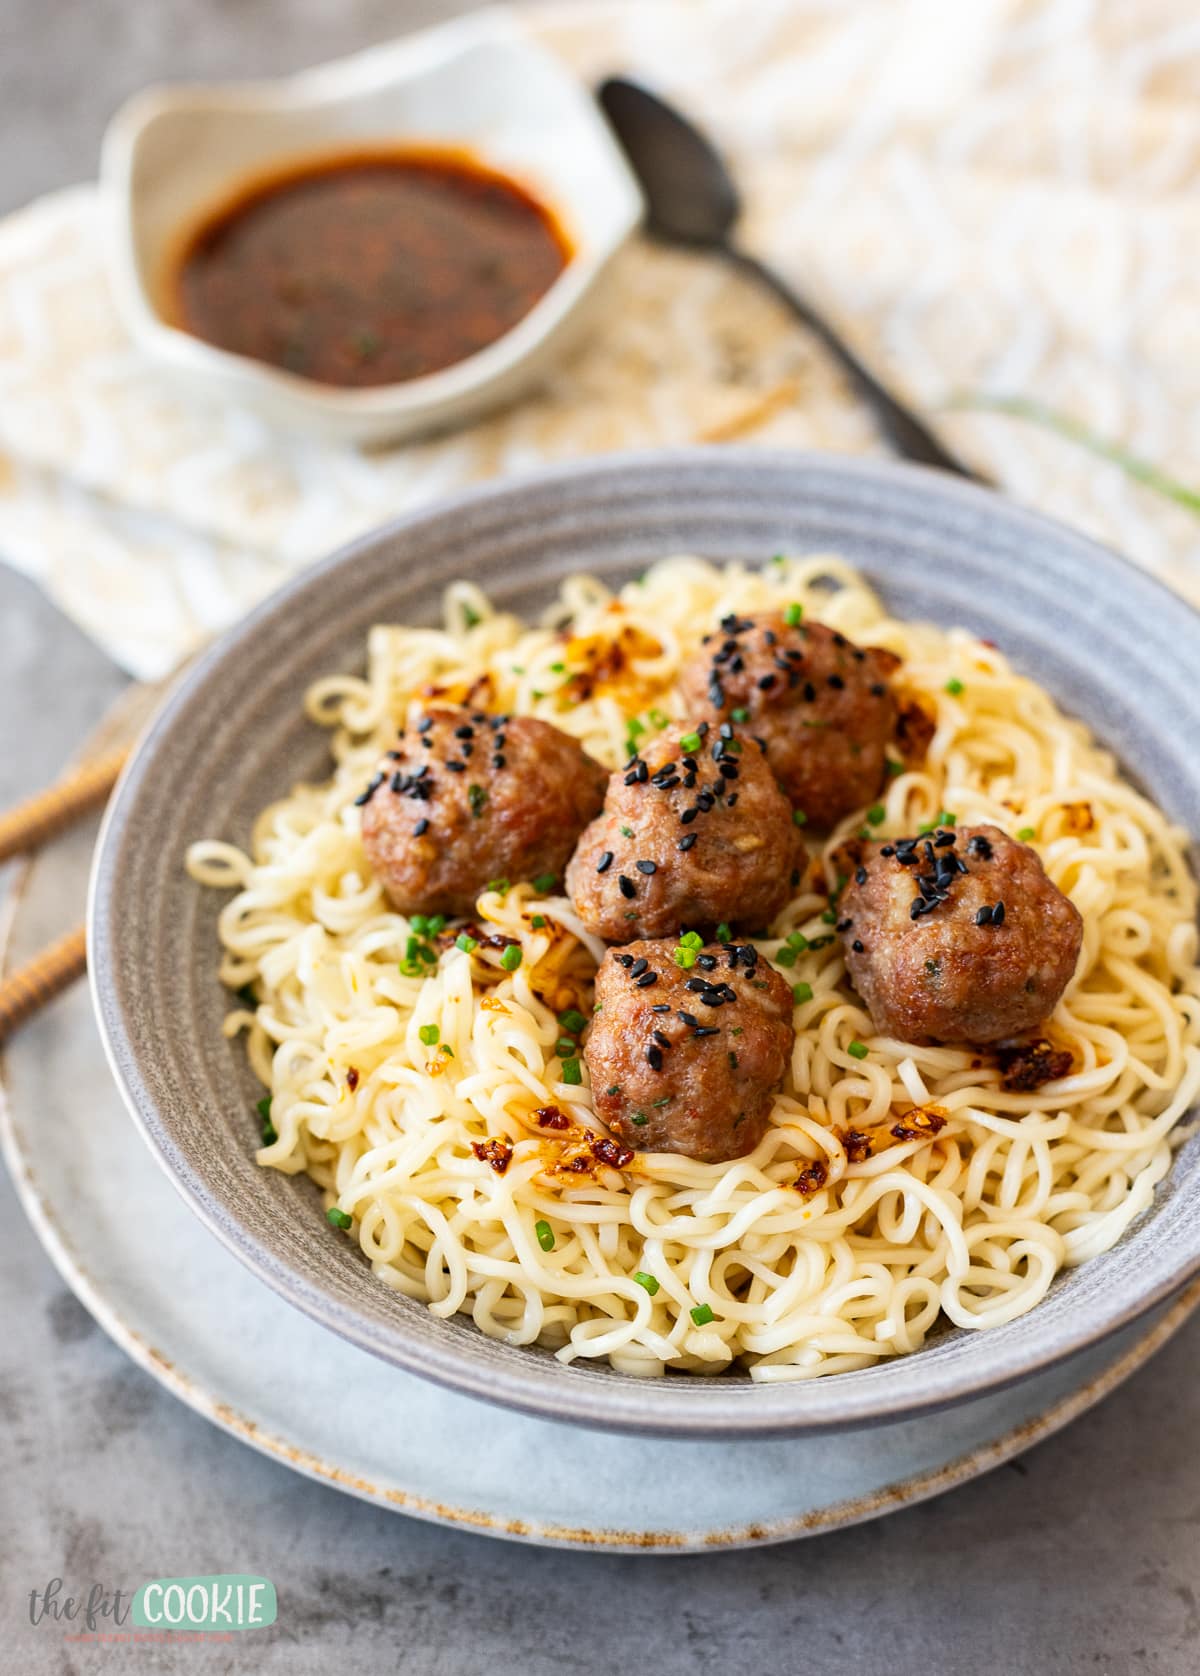 pork meatballs with black sesame seeds on top of noodles in a gray bowl. 